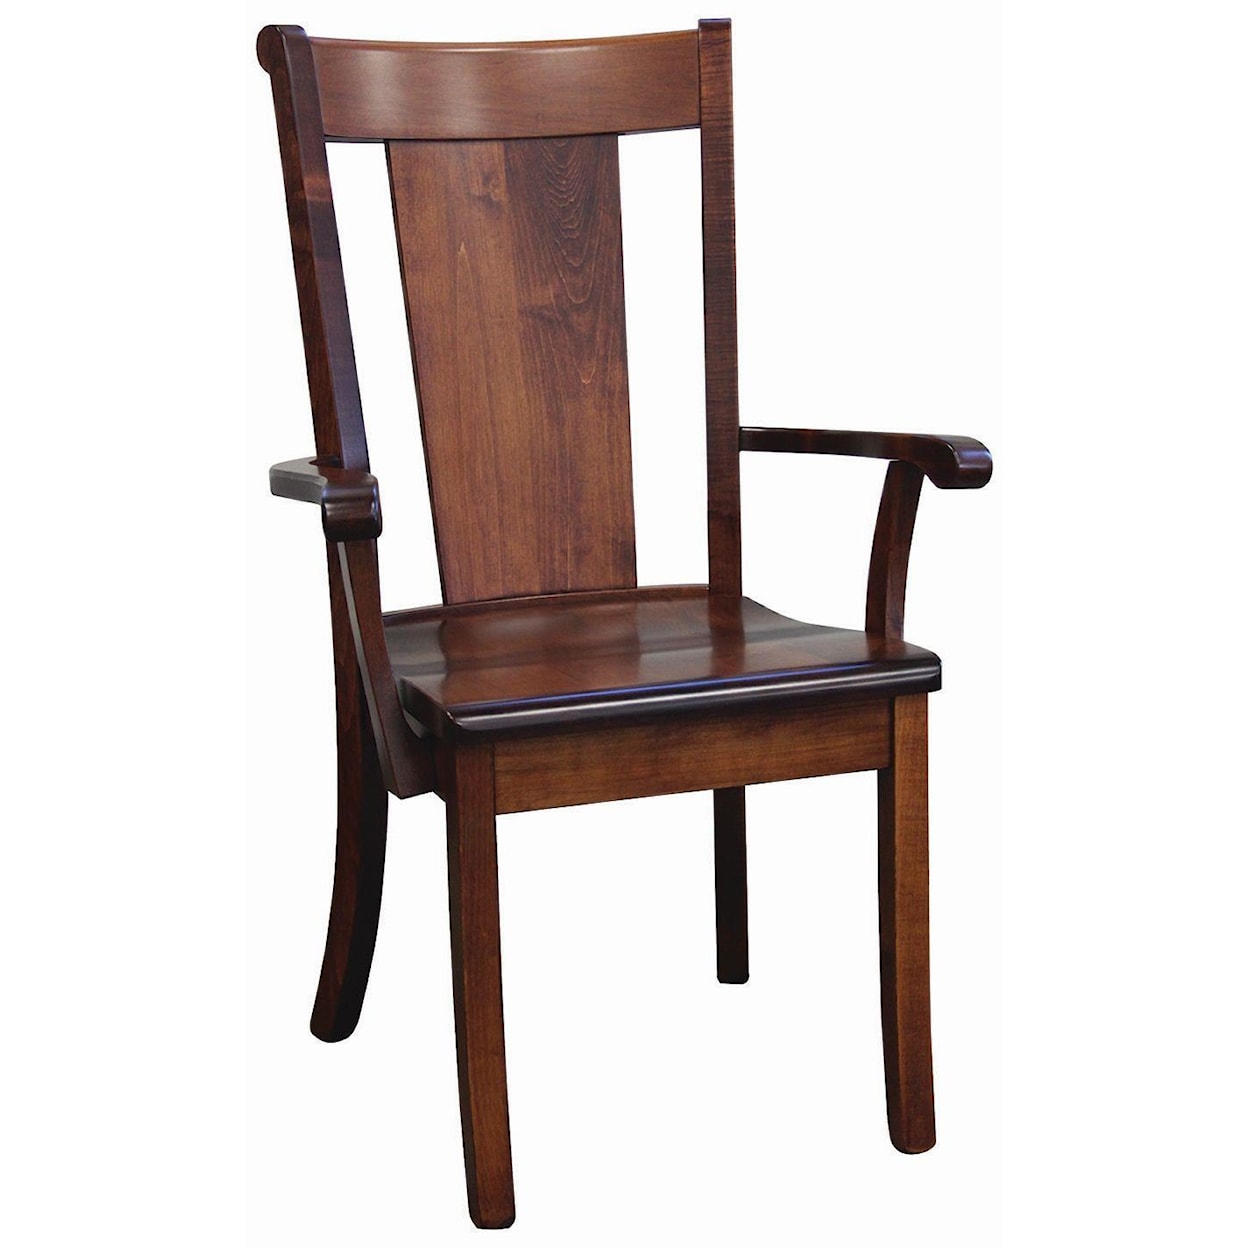 Oakland Wood Cape May Arm Chair